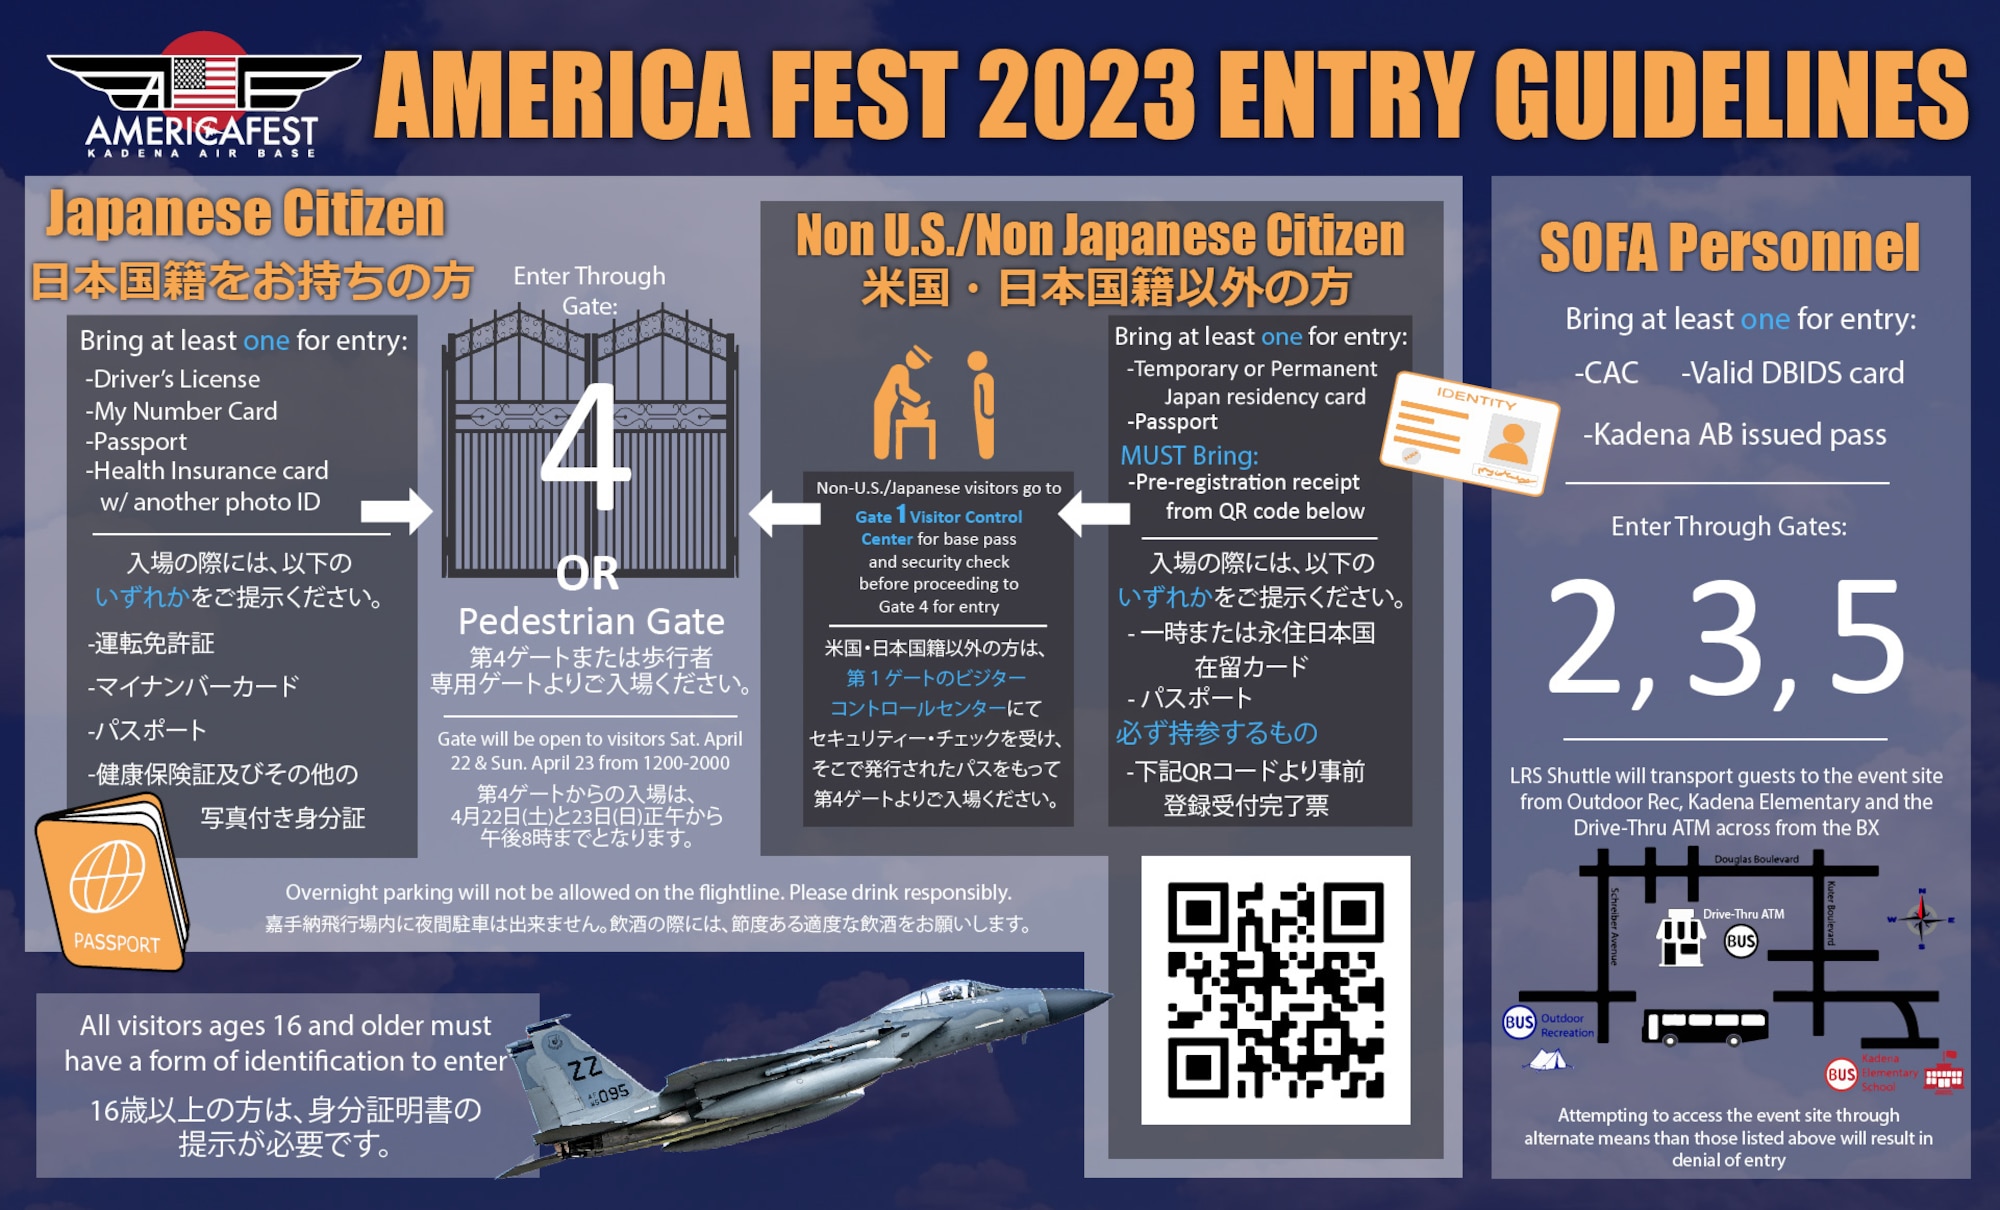 A graphic explaining the entry guidelines for America Fest 2023